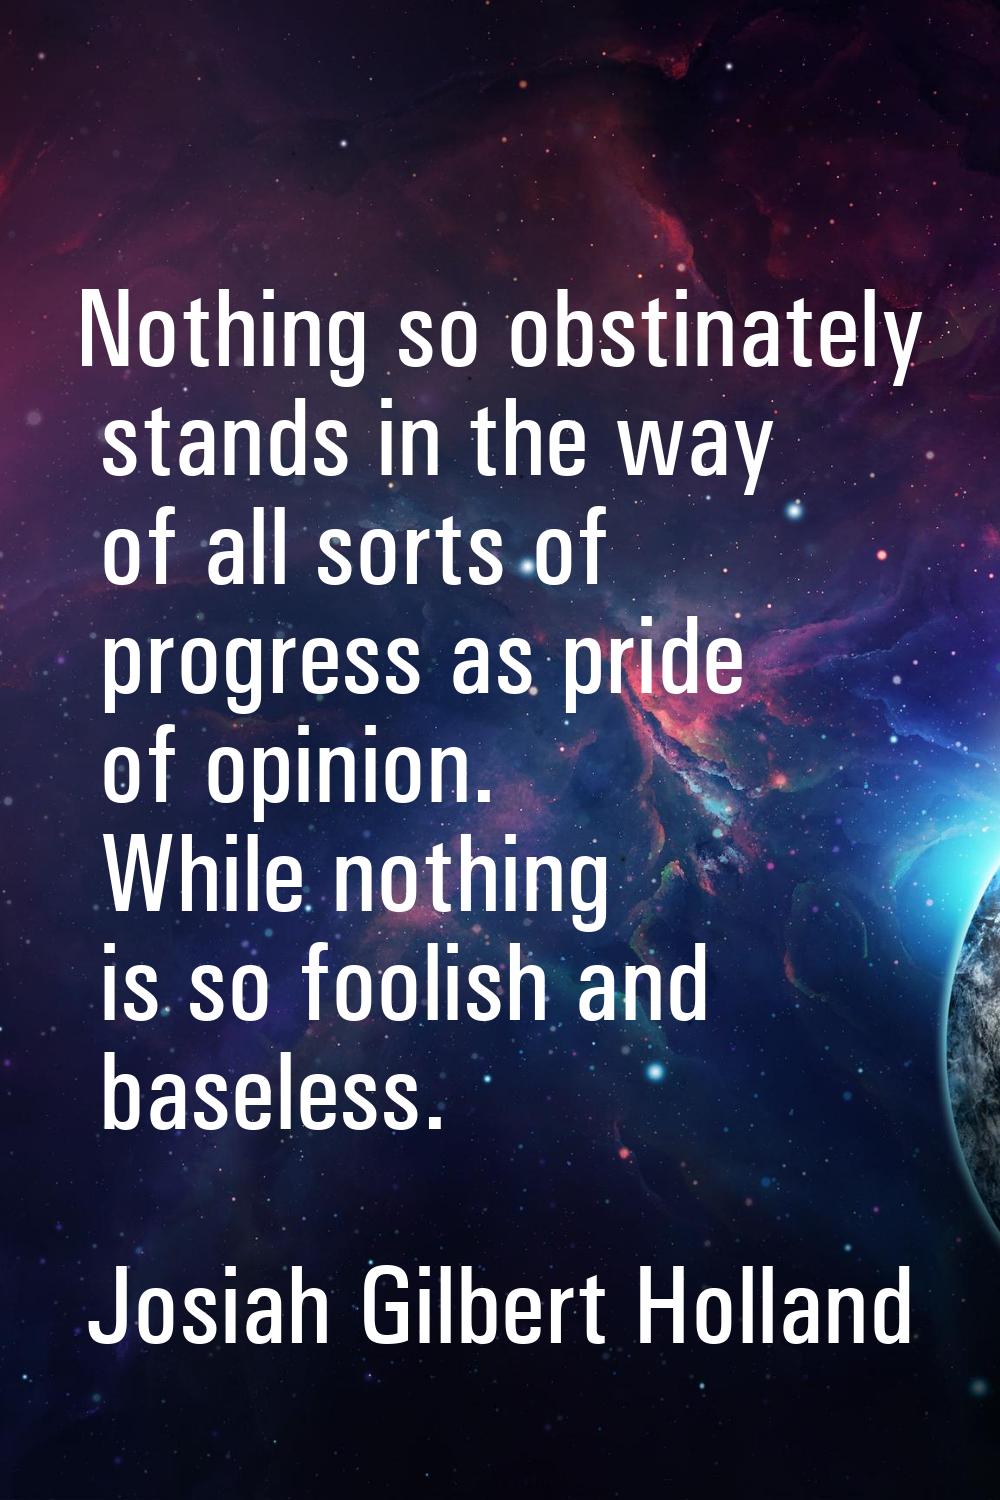 Nothing so obstinately stands in the way of all sorts of progress as pride of opinion. While nothin